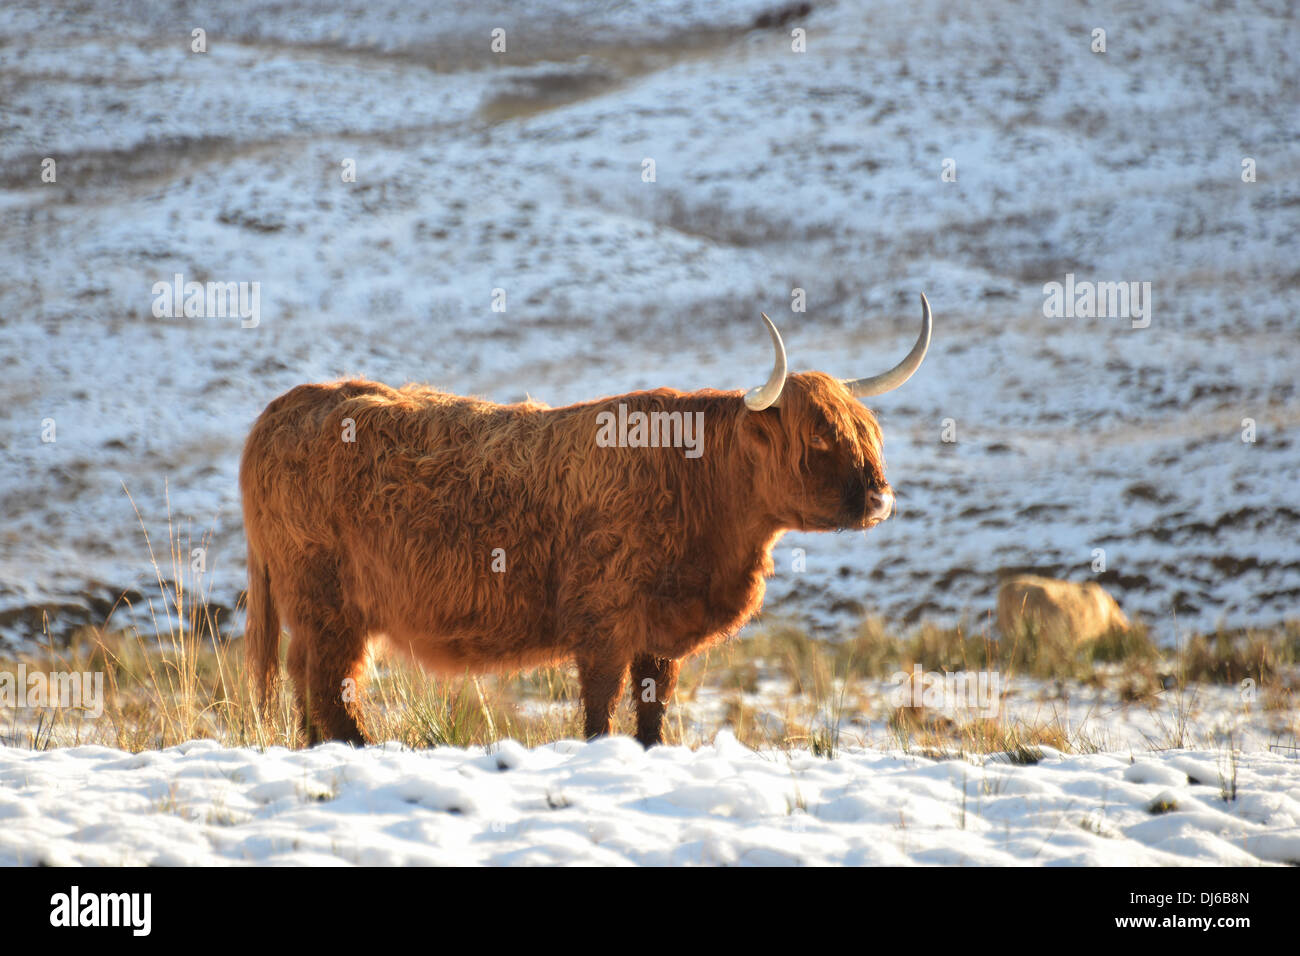 Highland cow standing in a winter landscape. Stock Photo